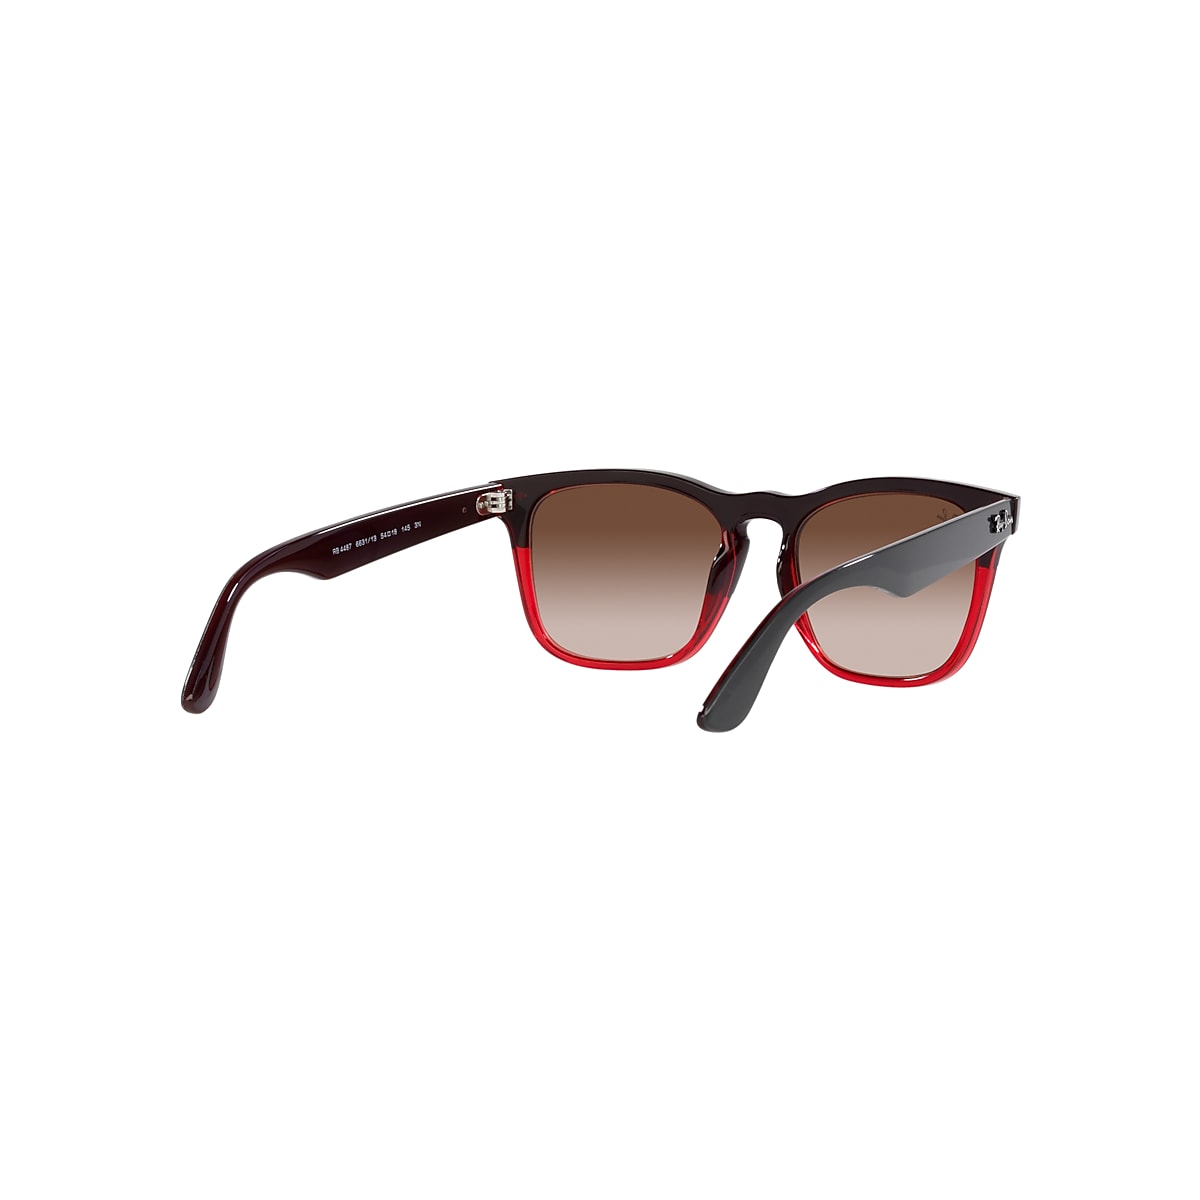 STEVE Sunglasses in Grey On Transparent Red and Brown - Ray-Ban